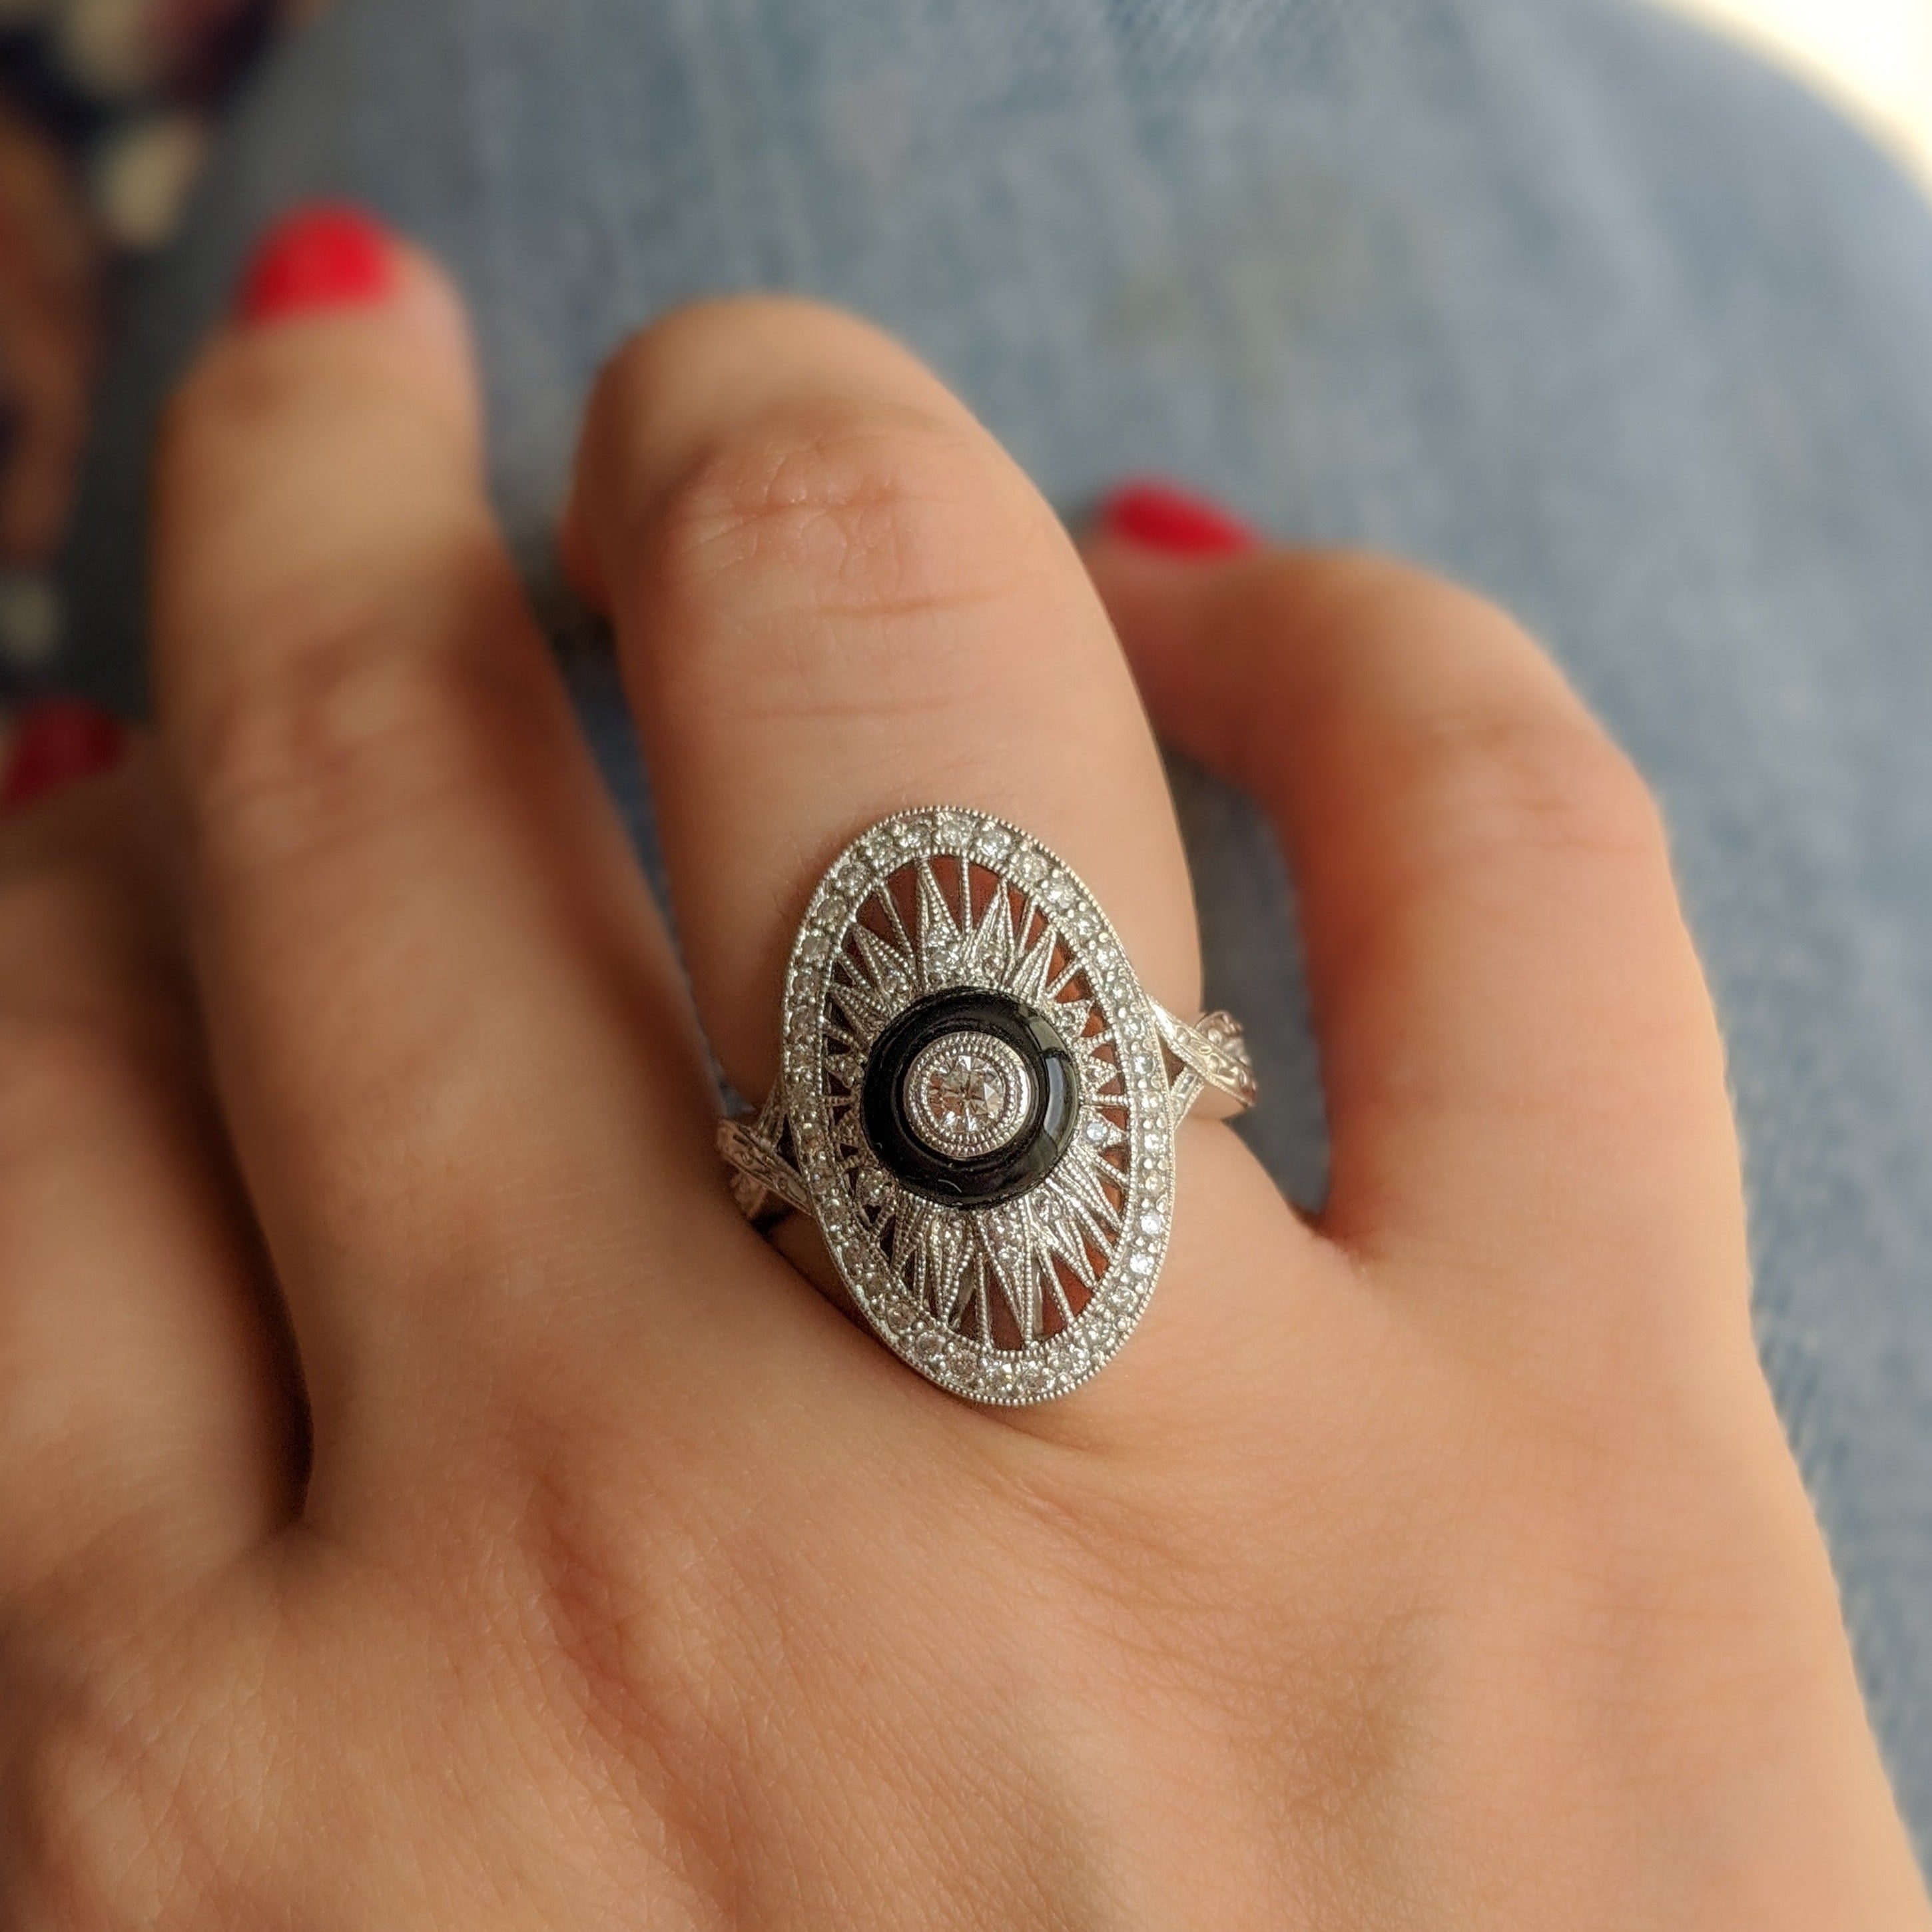 White gold diamond ring with onyx centre worn on woman’s finger.